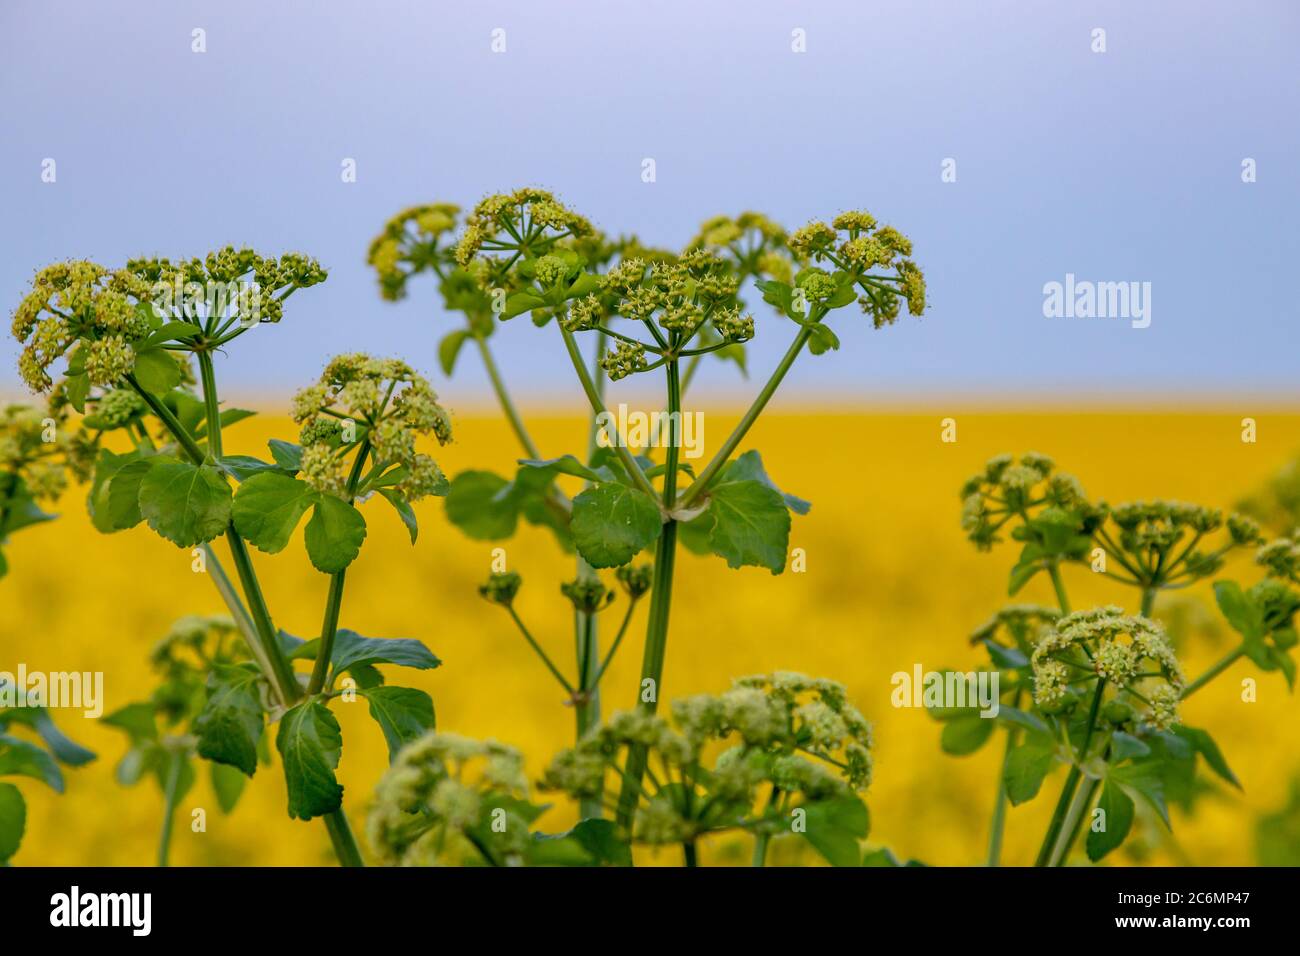 Budding foliage in front of a canola/rapeseed field in the early morning, with a shallow depth of field Stock Photo